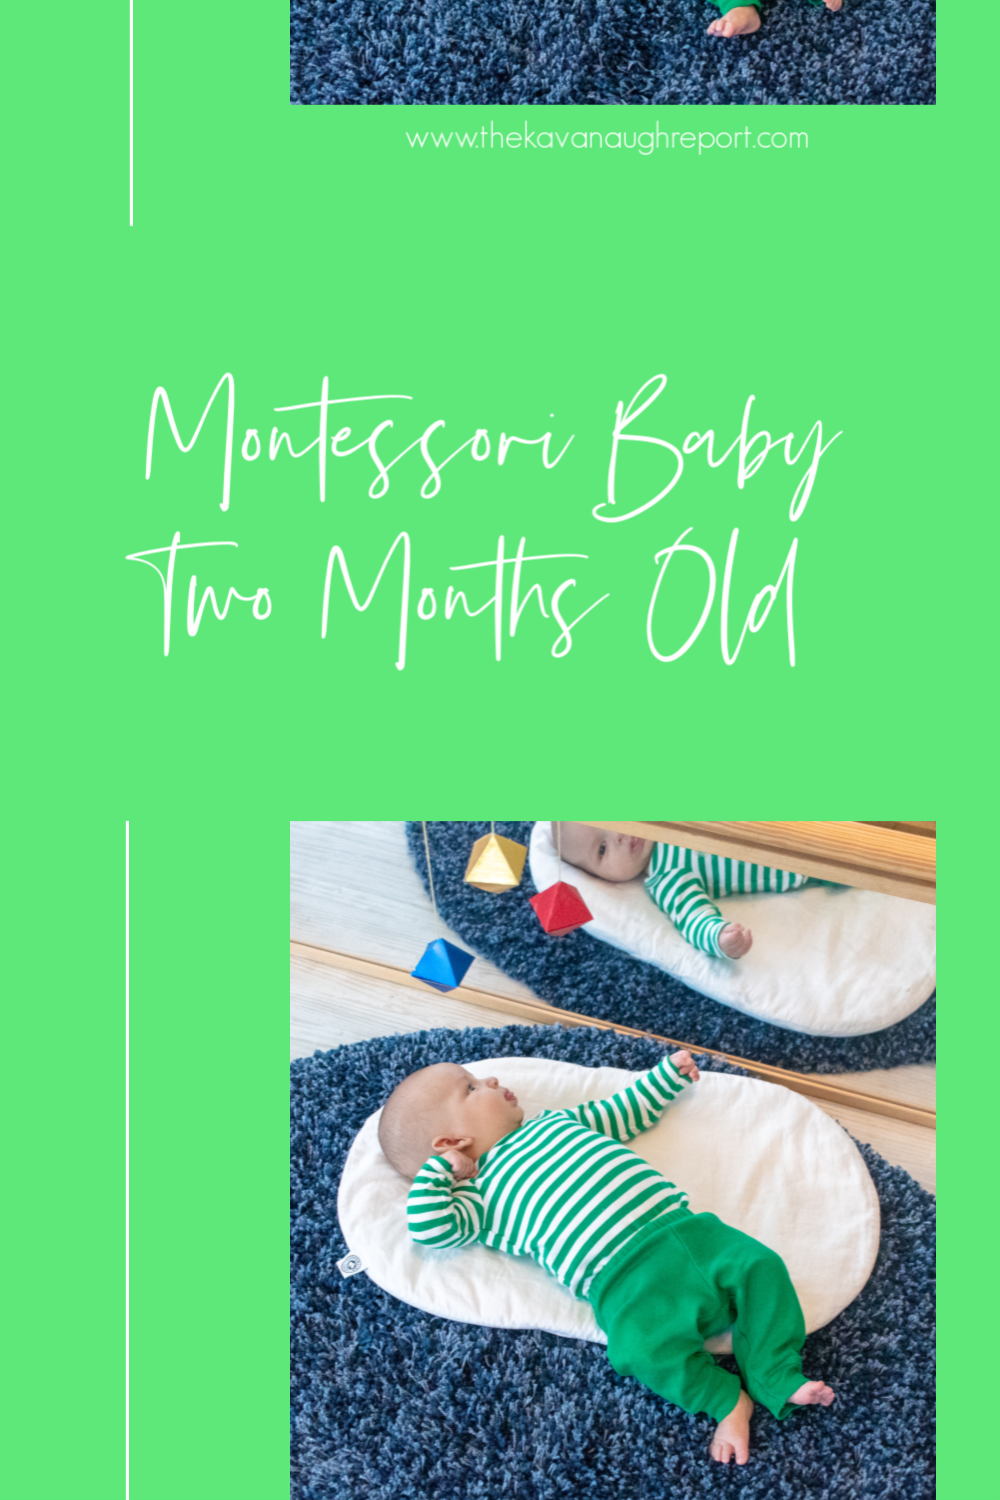 Using the Montessori method with your two-month-old - articles and tips for using Montessori with your baby